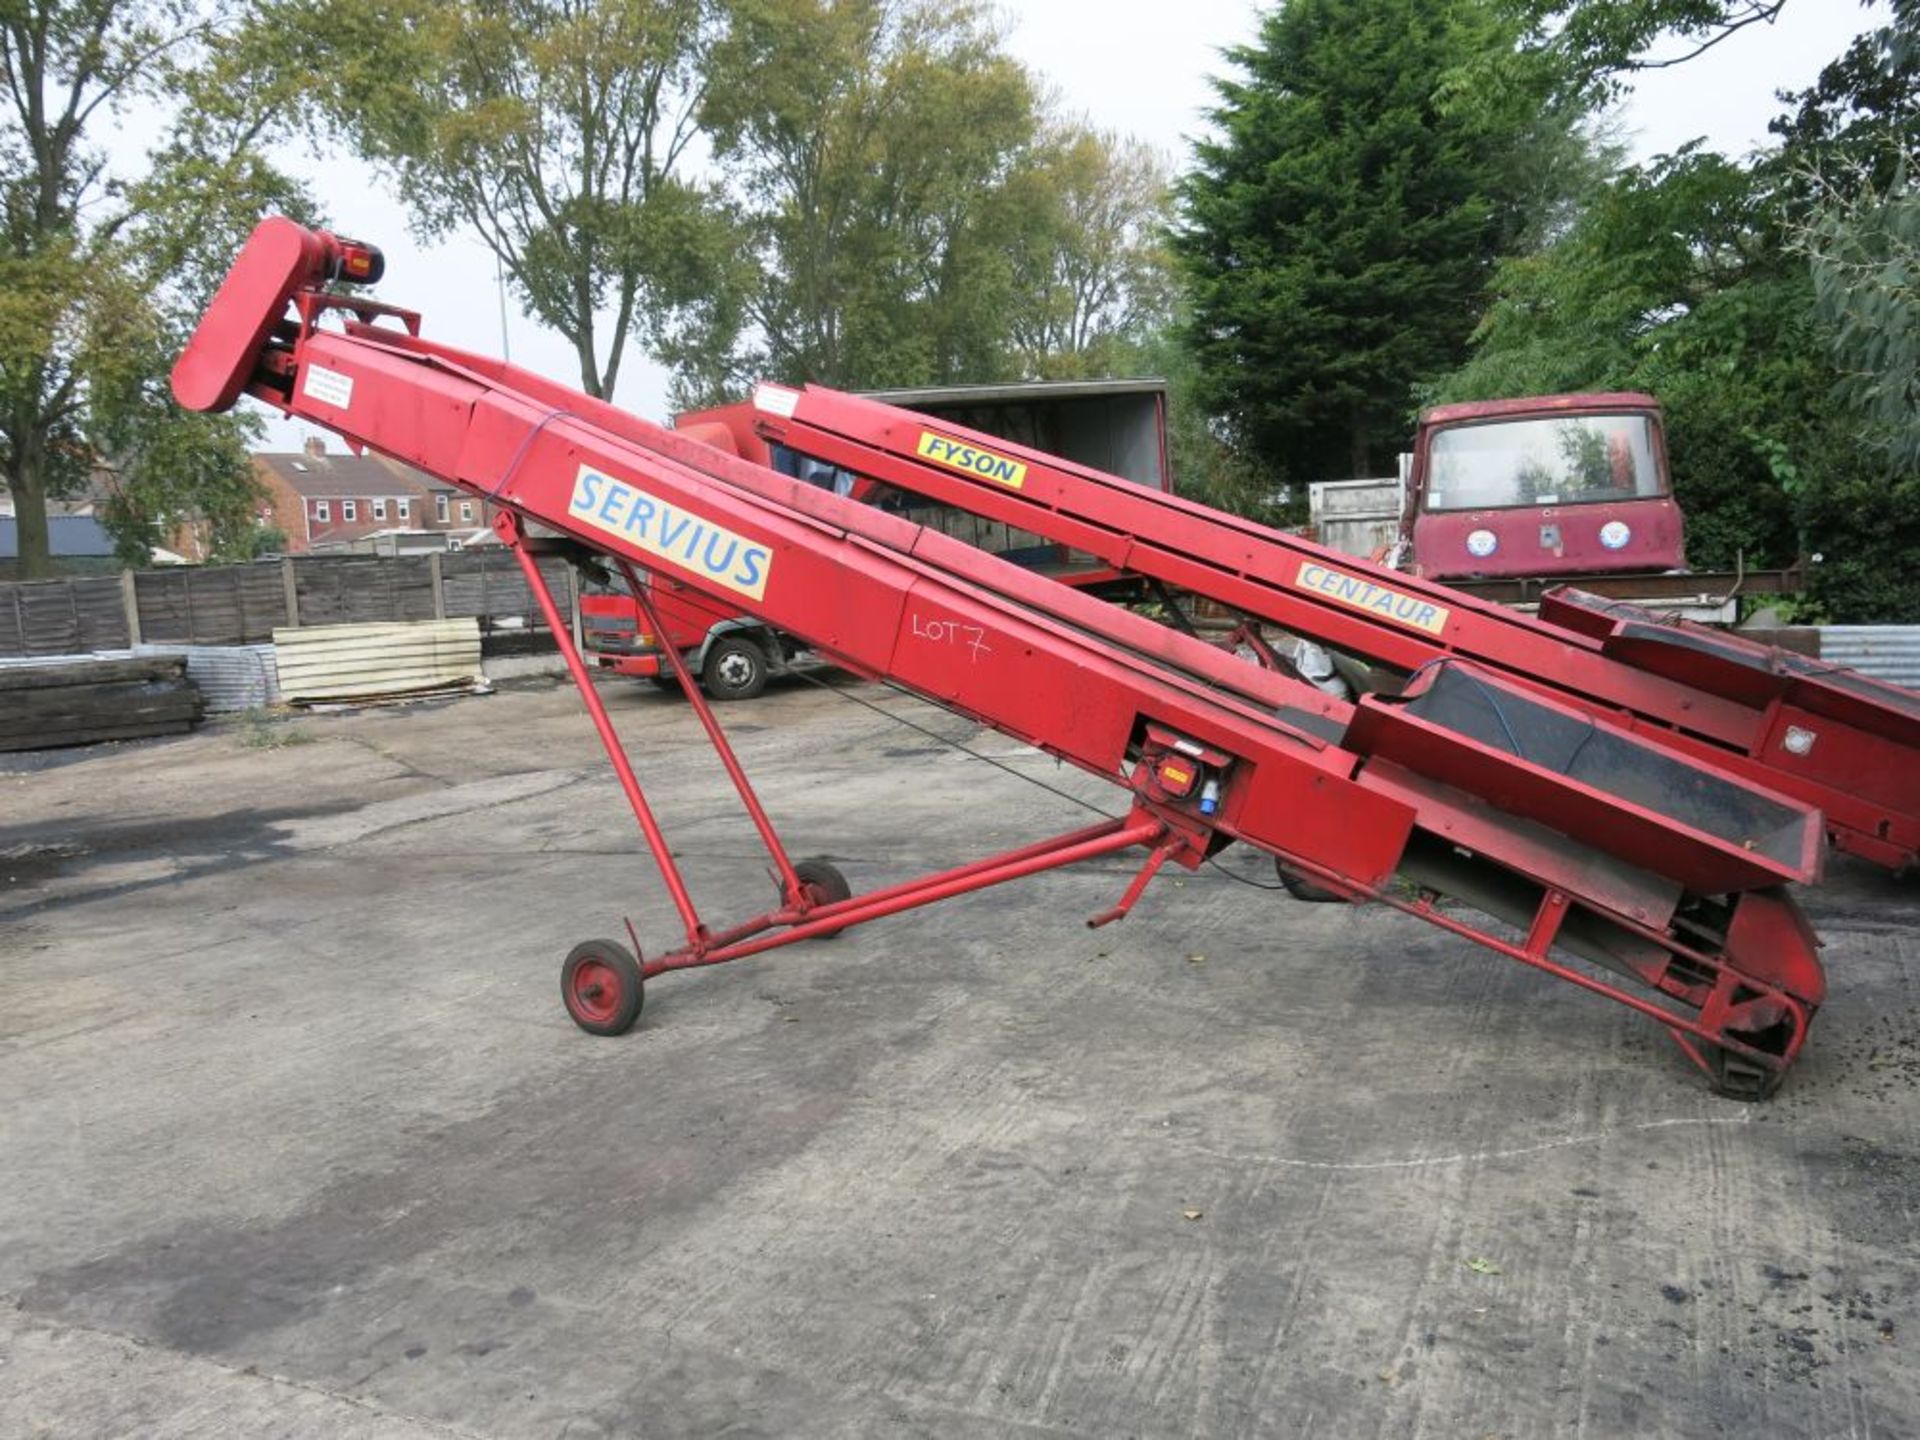 * Servis Portable Adjustable Conveyor, 250V. Buyer to remove and load. A Risk Assessment and